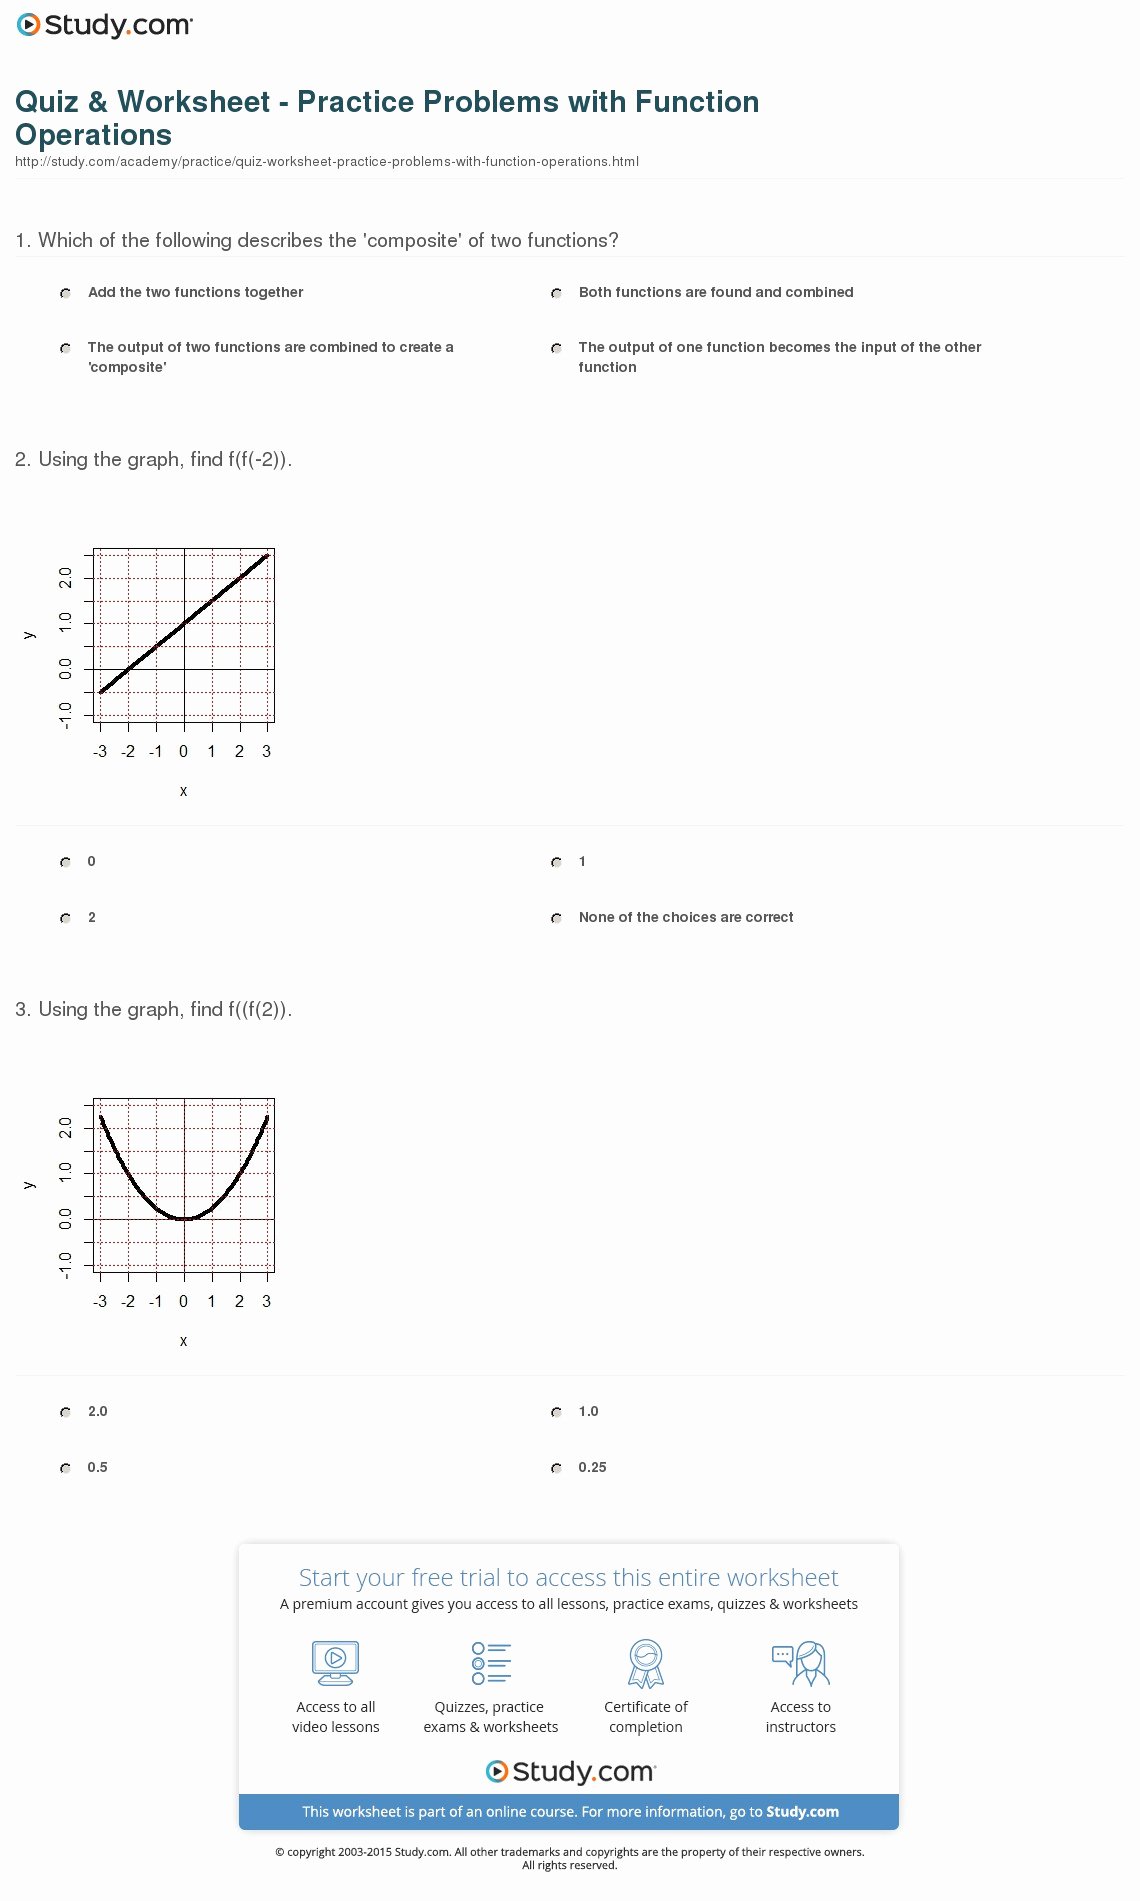 Composite Functions Worksheet Answers Fresh Quiz & Worksheet Practice Problems with Function